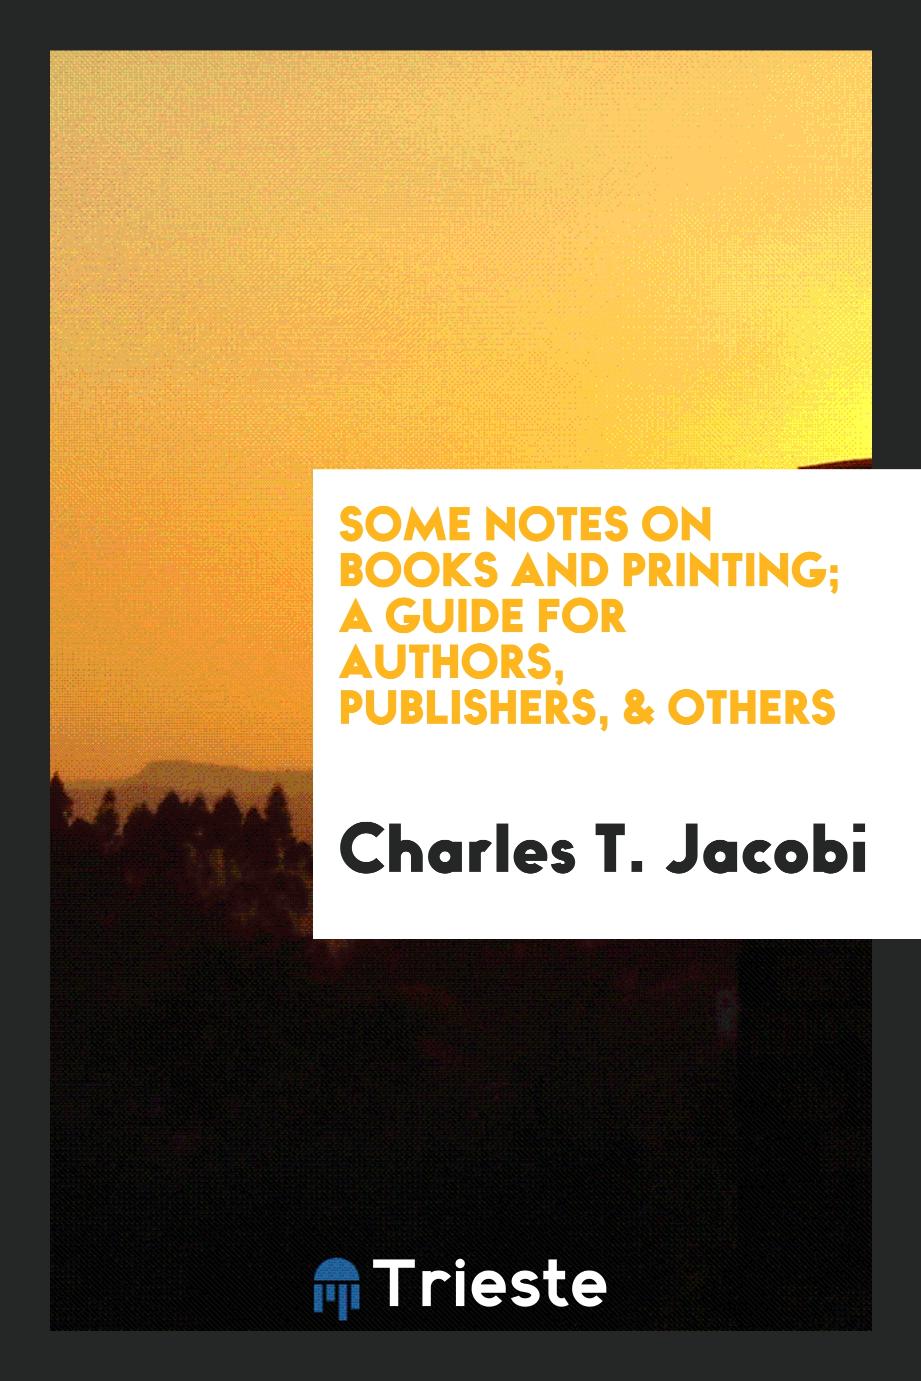 Some notes on books and printing; a guide for authors, publishers, & others